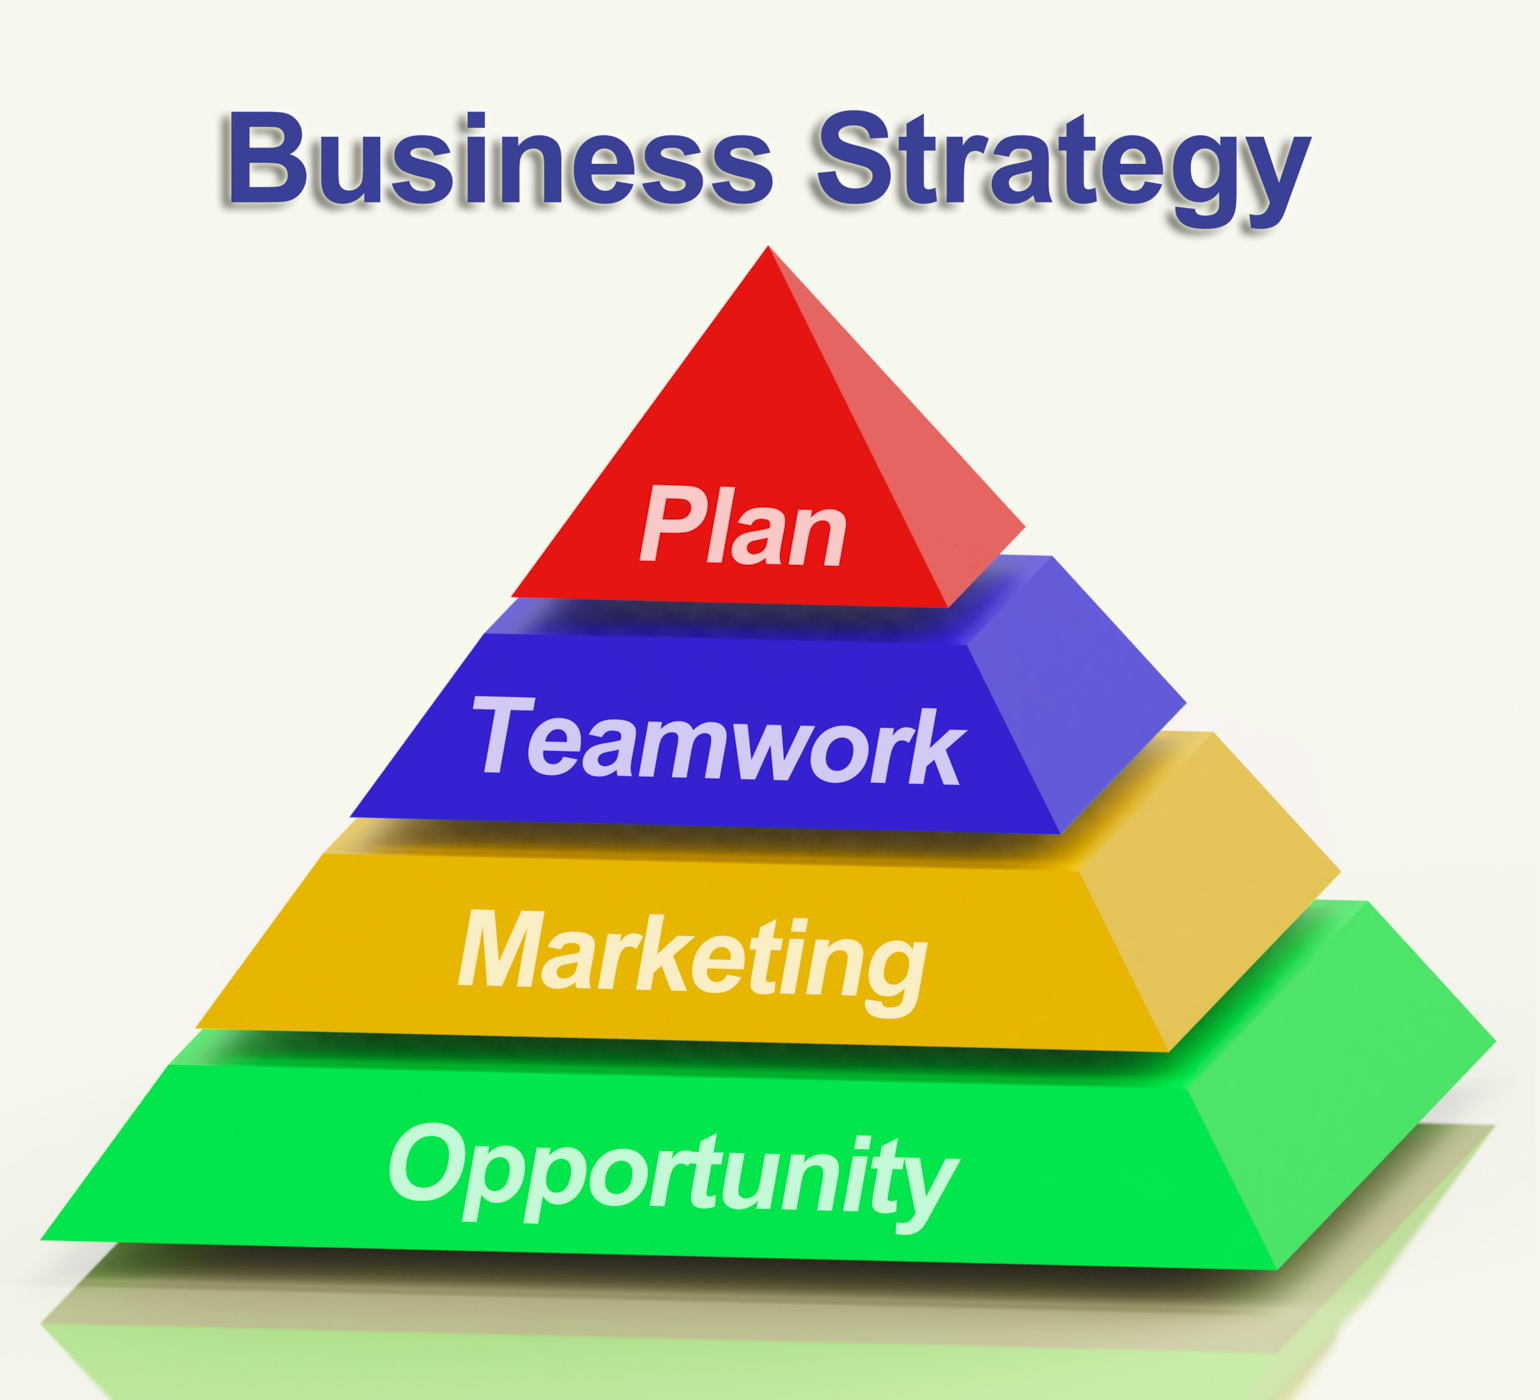 Business strategy pyramid showing teamwork and plan photo